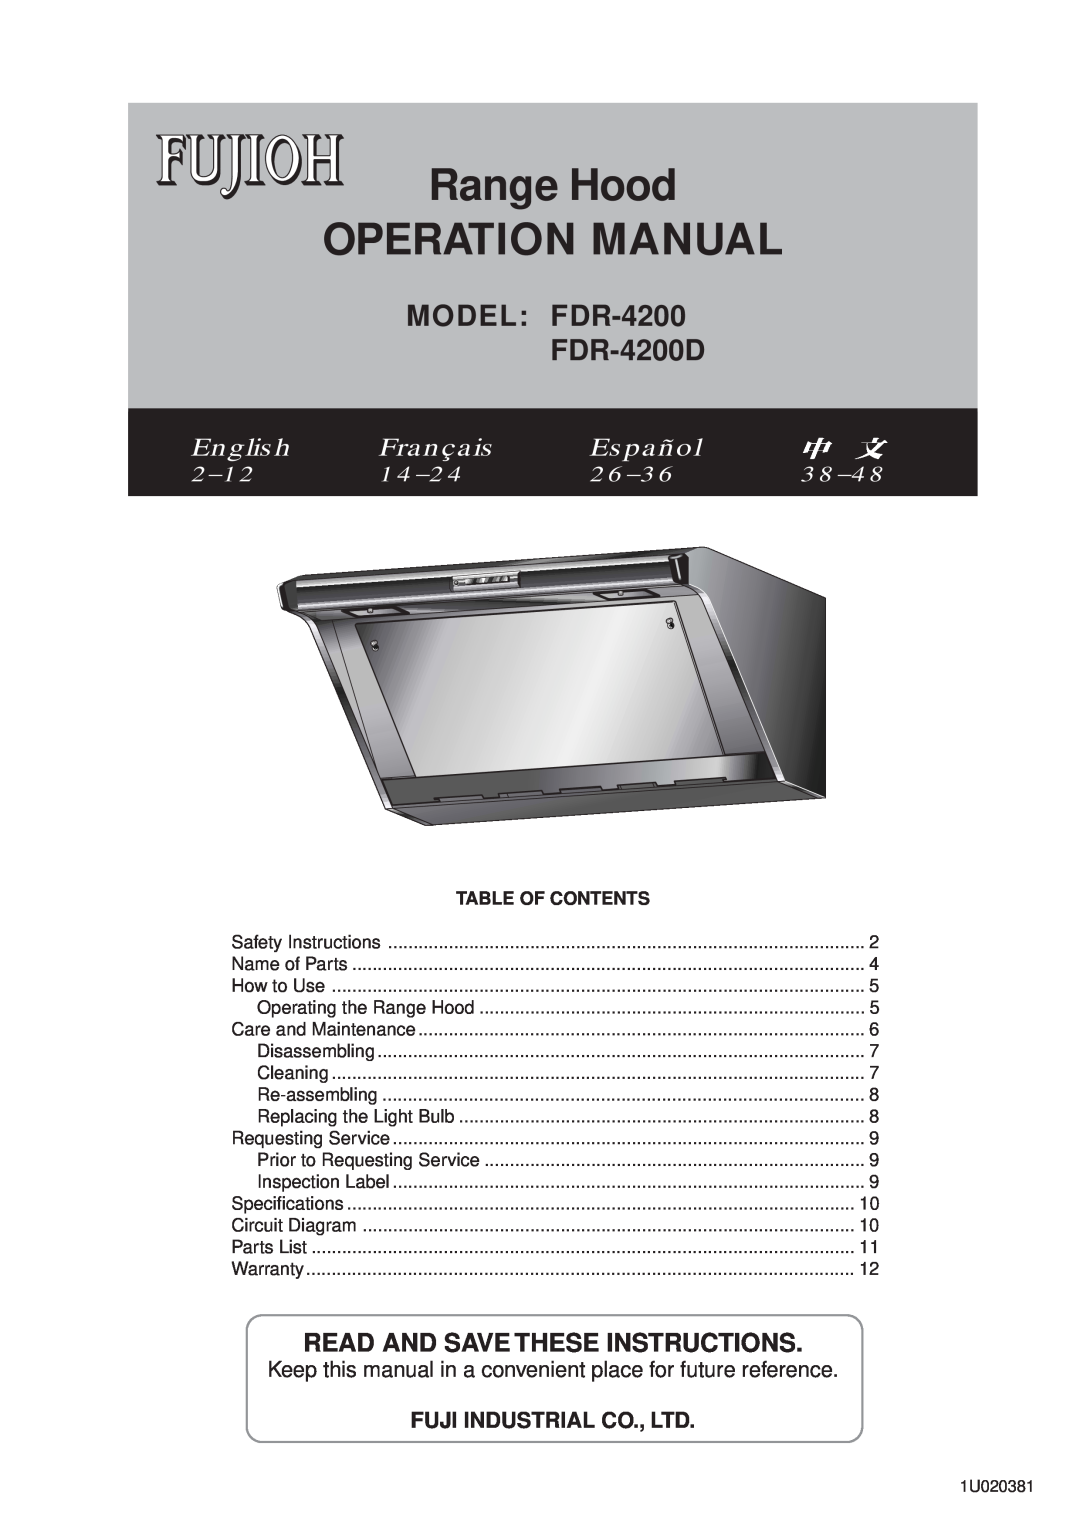 Fujioh operation manual MODEL FDR-4200 FDR-4200D, Read And Save These Instructions, English, Français, Español, 2 −12 